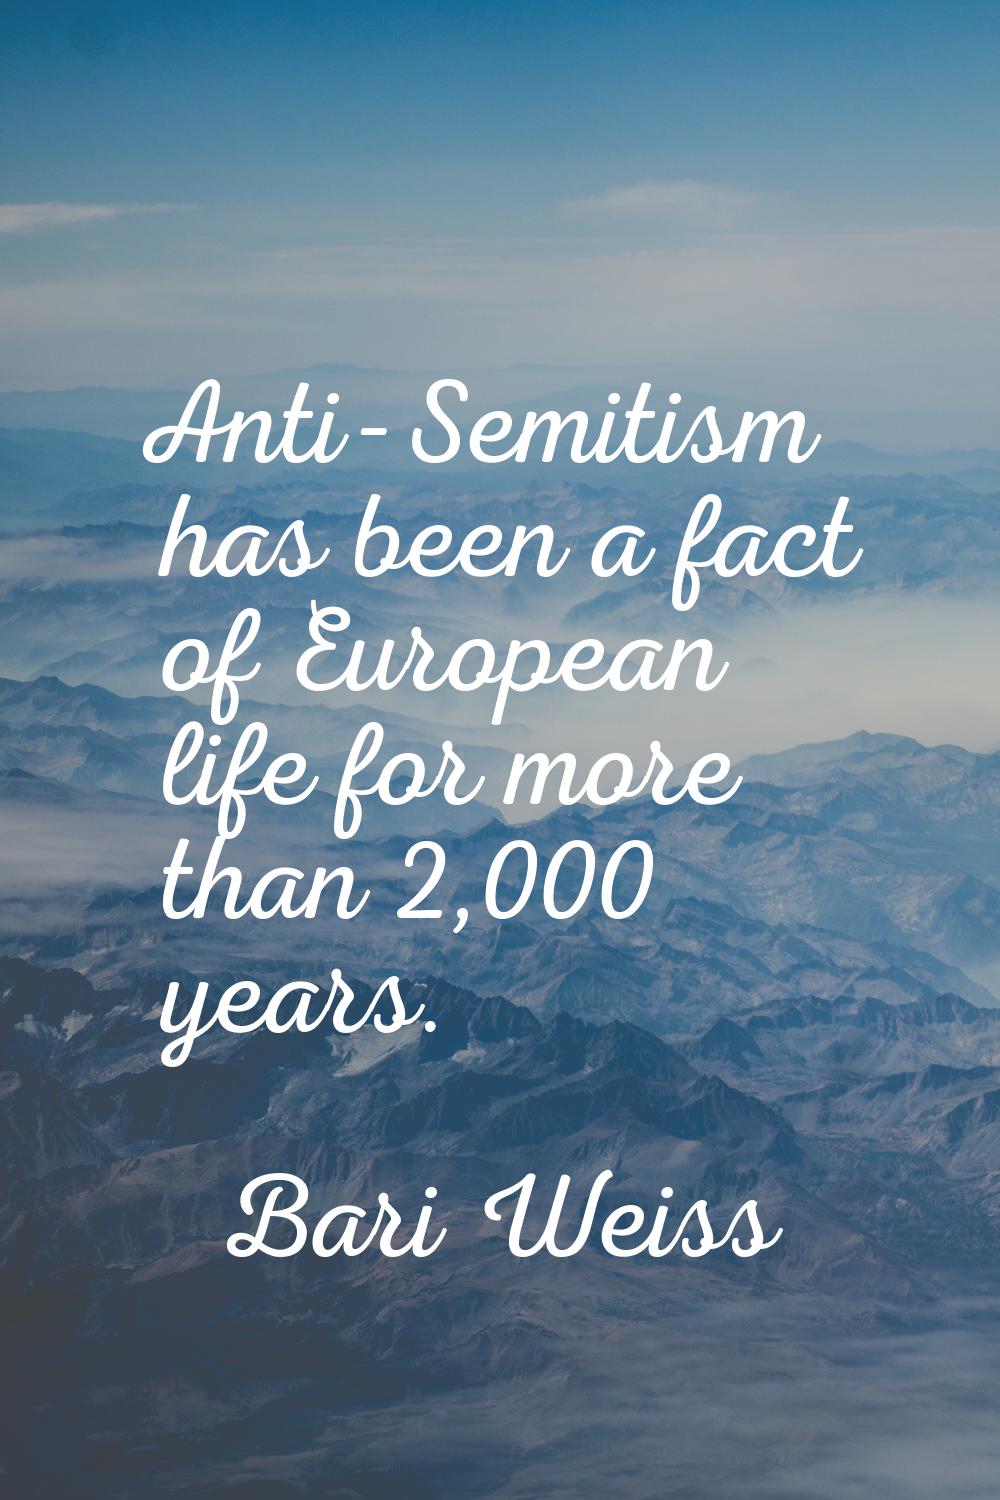 Anti-Semitism has been a fact of European life for more than 2,000 years.